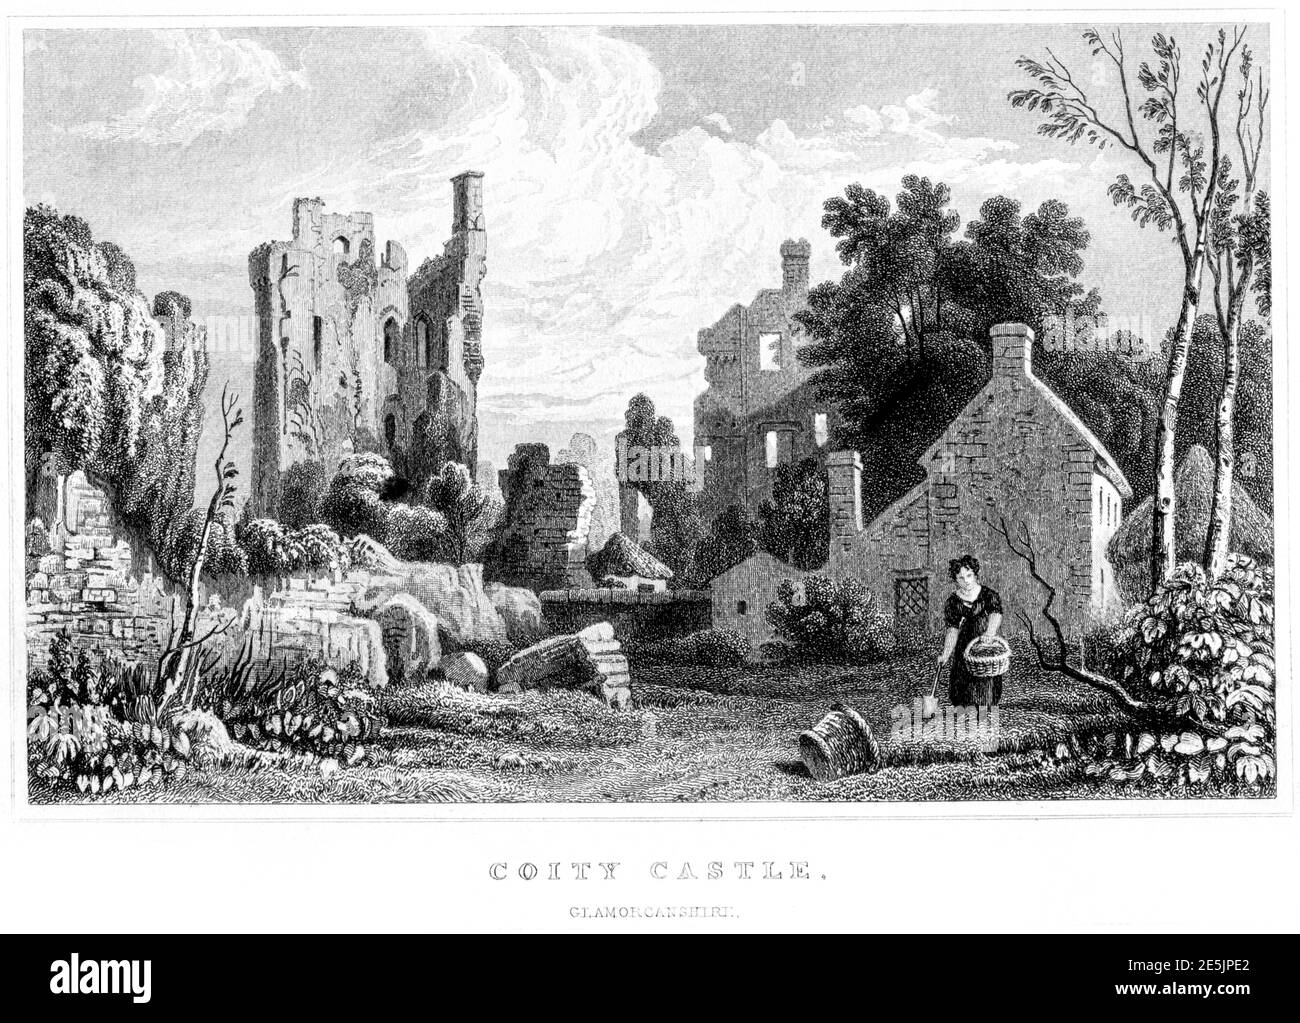 An engraving of Coity Castle, Glamorganshire scanned at high resolution from a book published in 1854.  Believed copyright free. Stock Photo